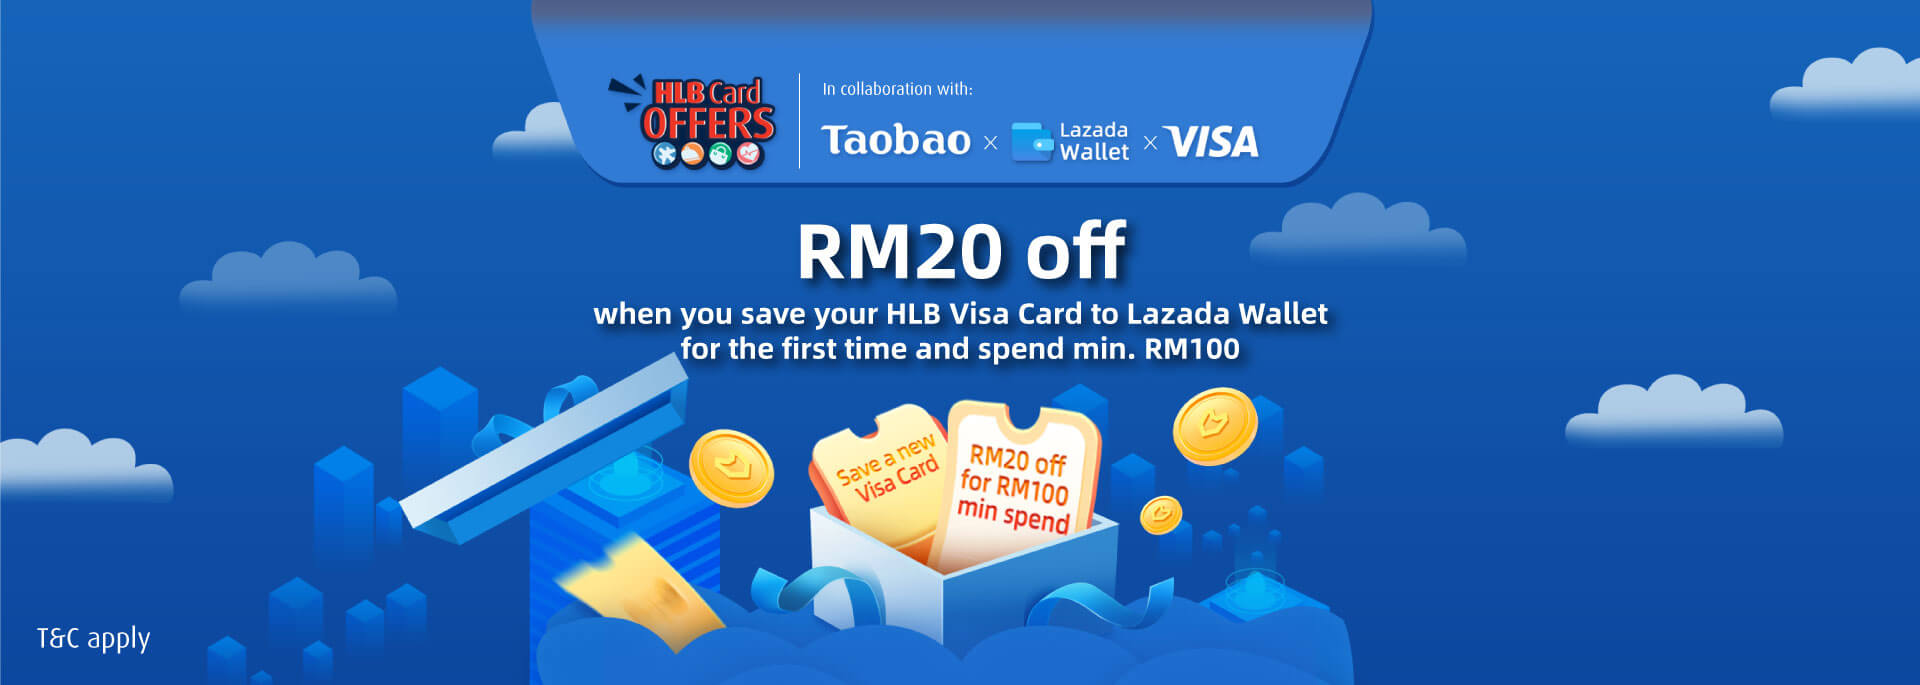 RM20 off when you save your HLB Visa Card to Lazada Wallet for the first time and spend min. RM100